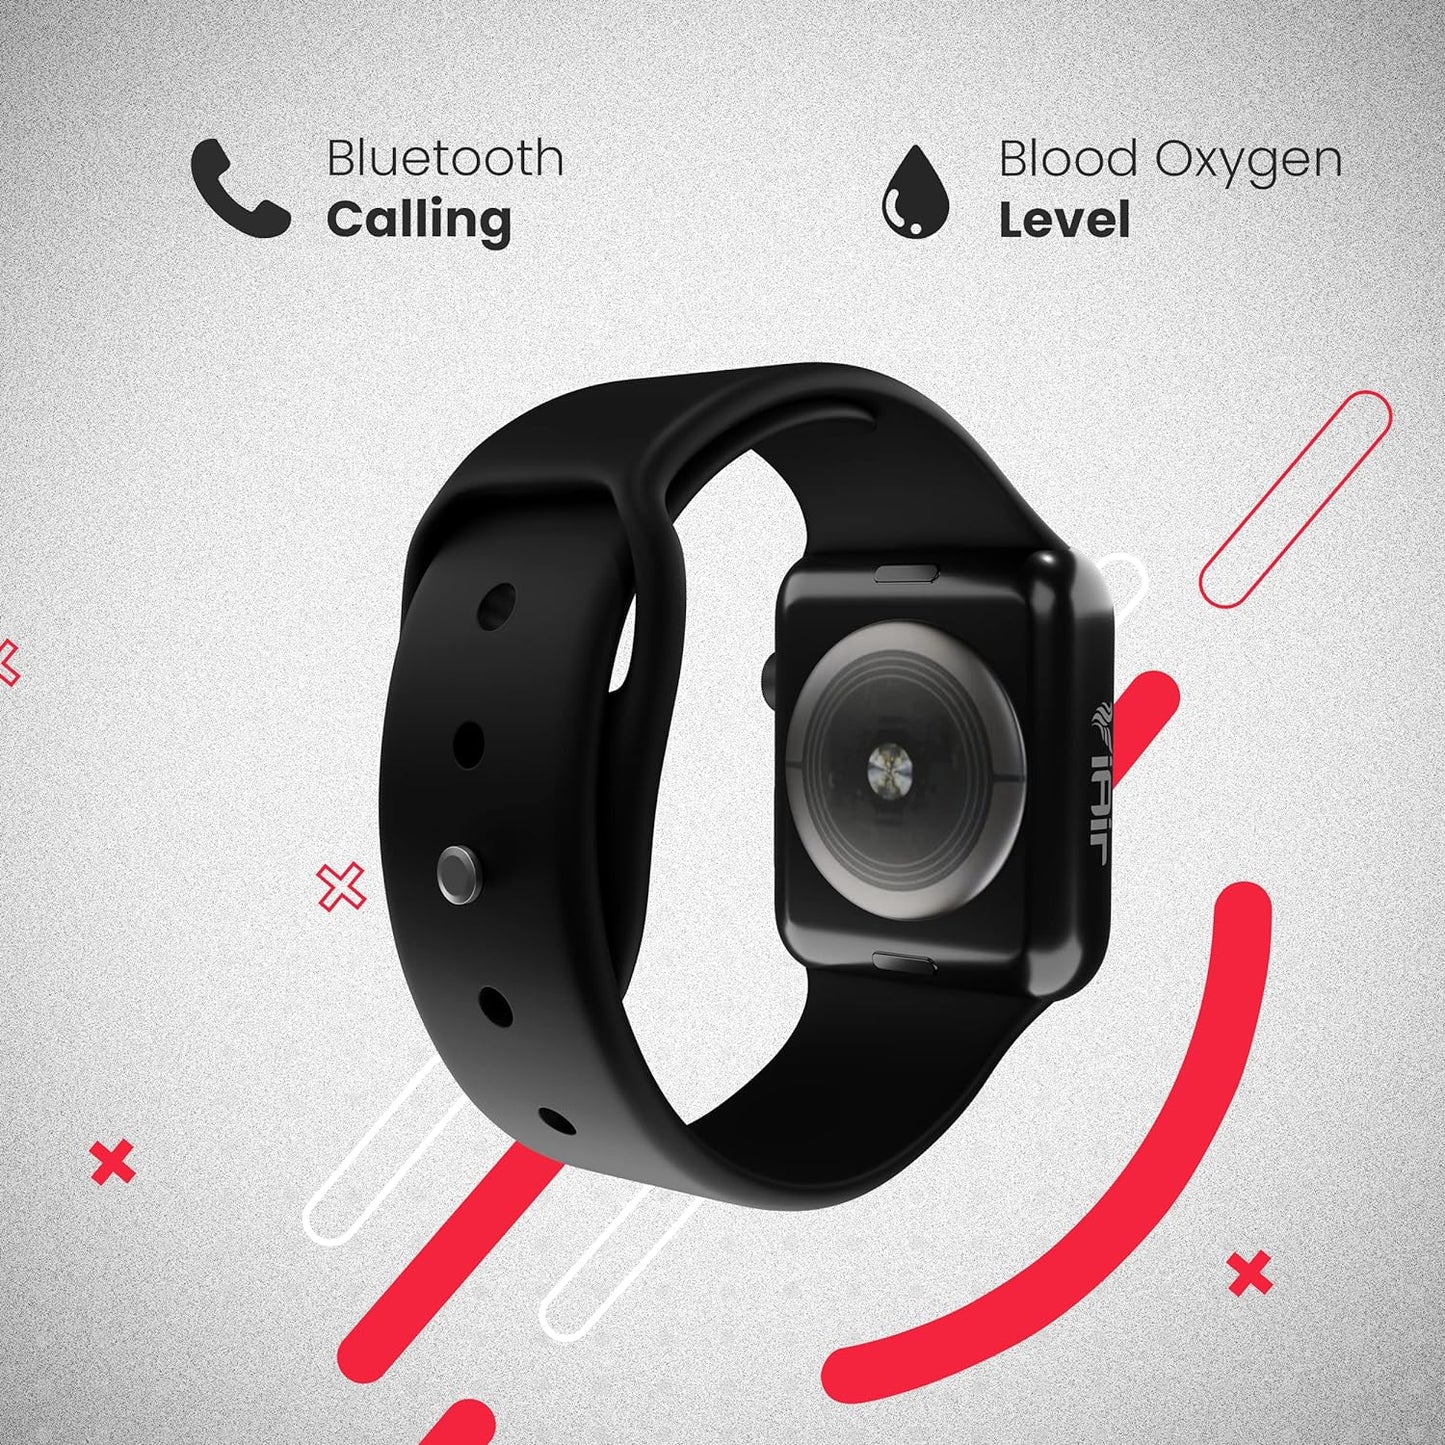 IAIR W5 Bluetooth Calling Smart Watch | Functional Scroll Button | 1.75”HD IPS Curved Touch Screen with Color Display, IP68 Waterproof